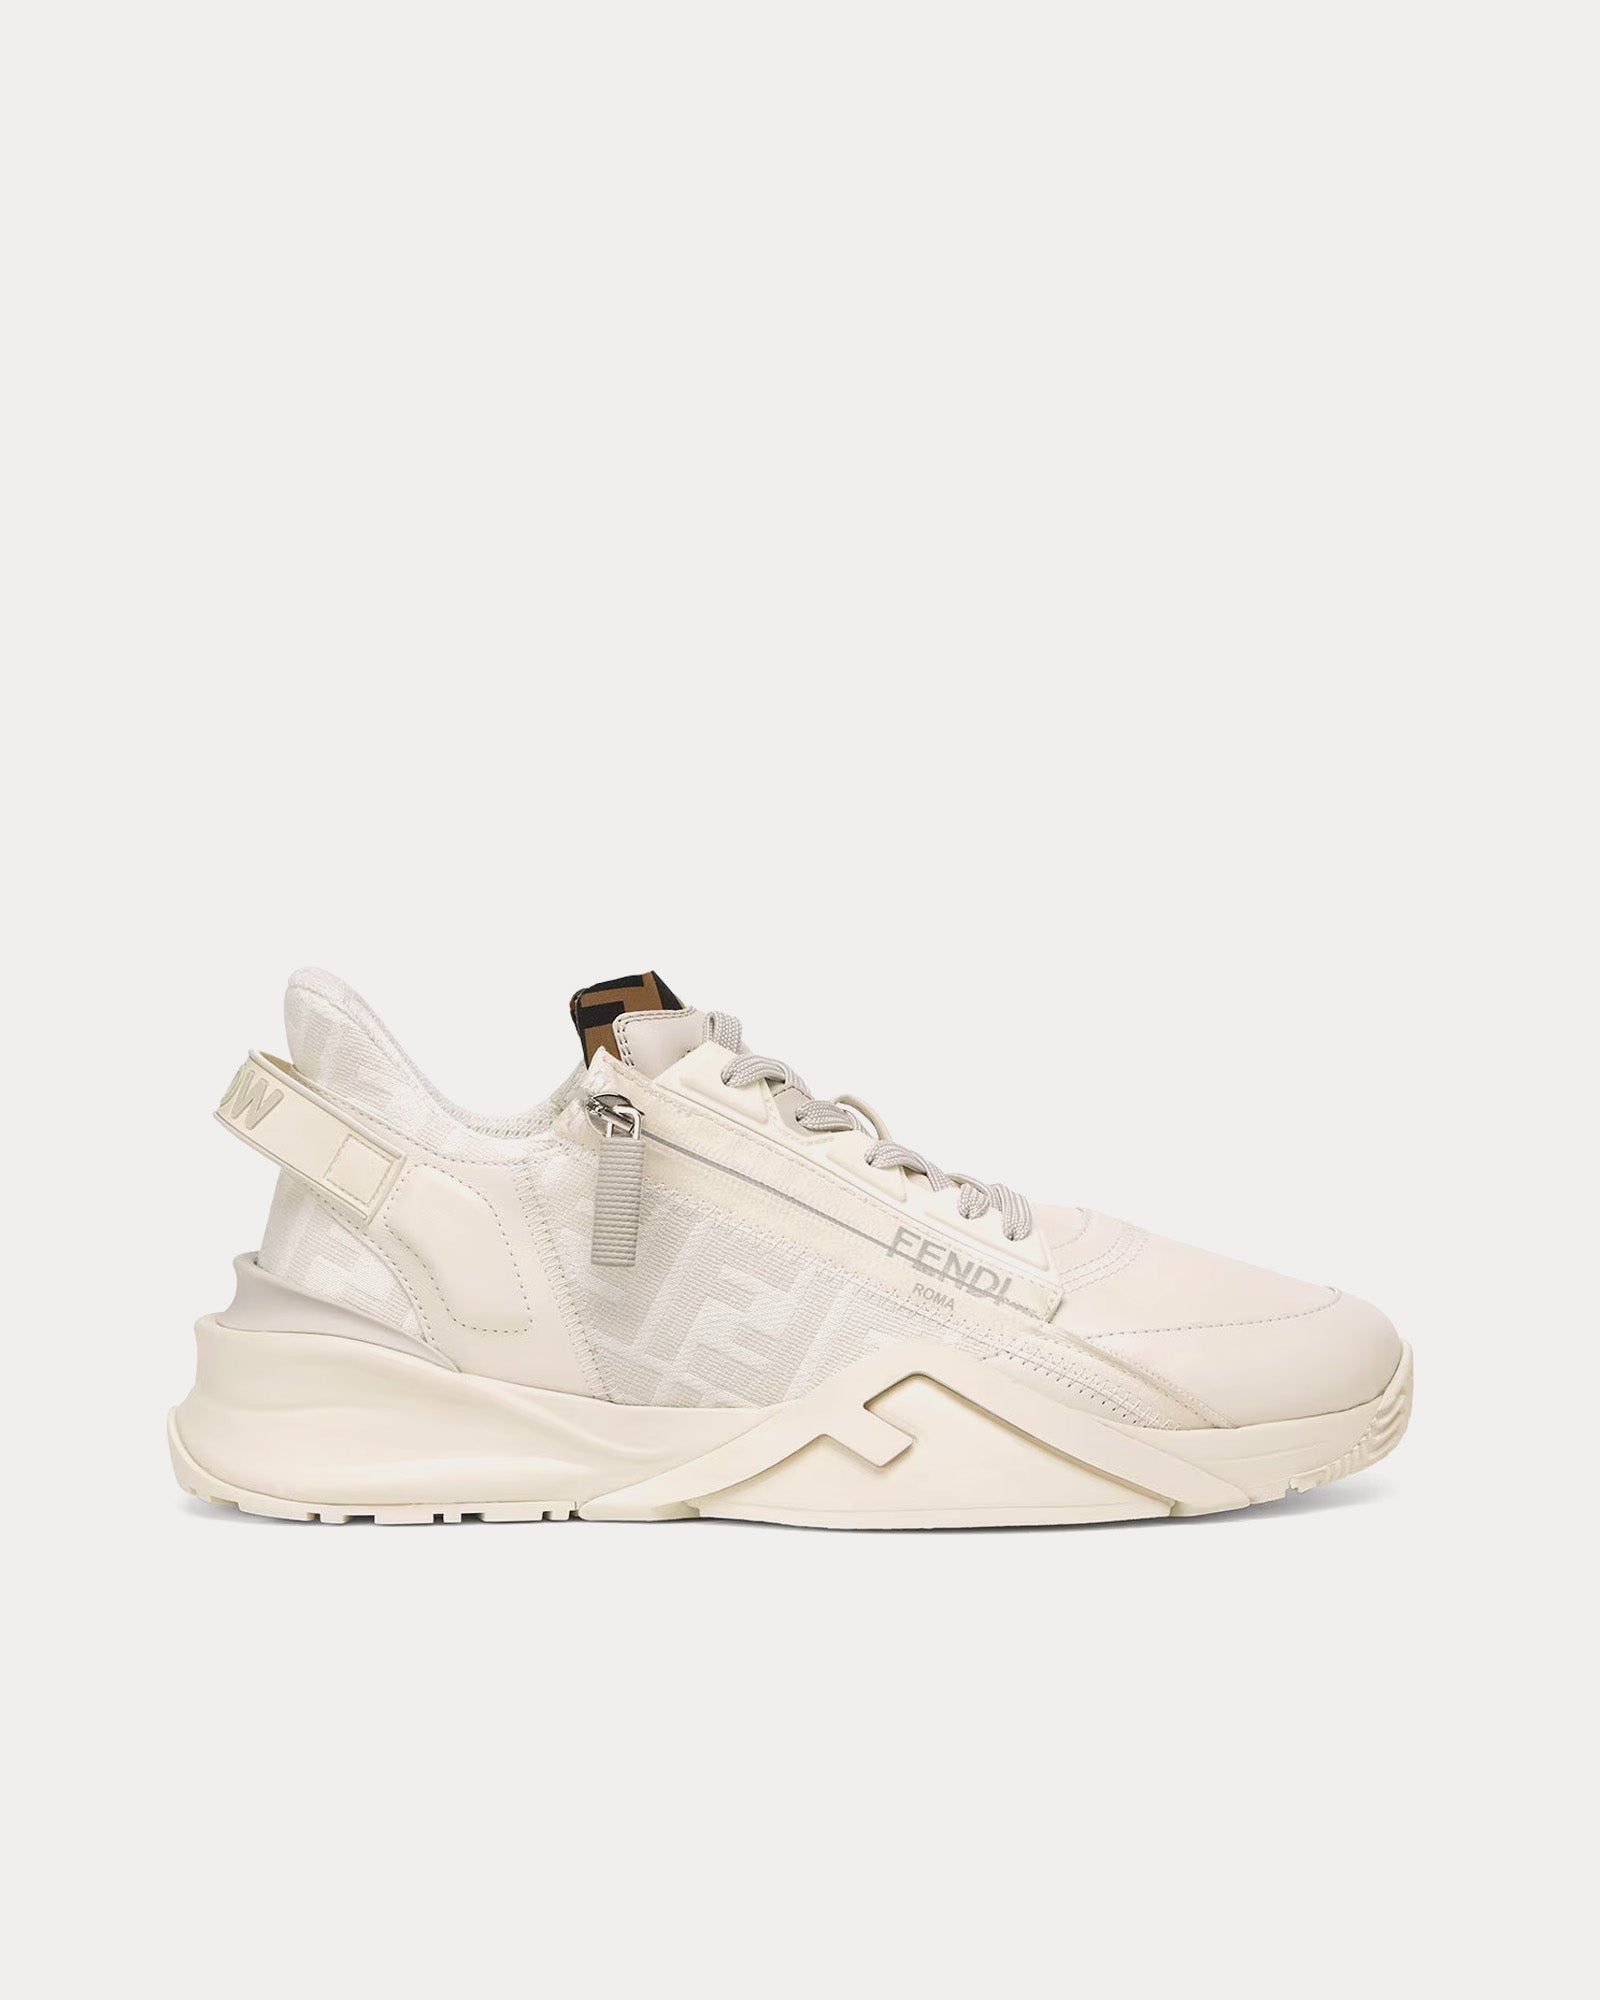 Fendi by Marc Jacobs - Flow Leather White Low Top Sneakers